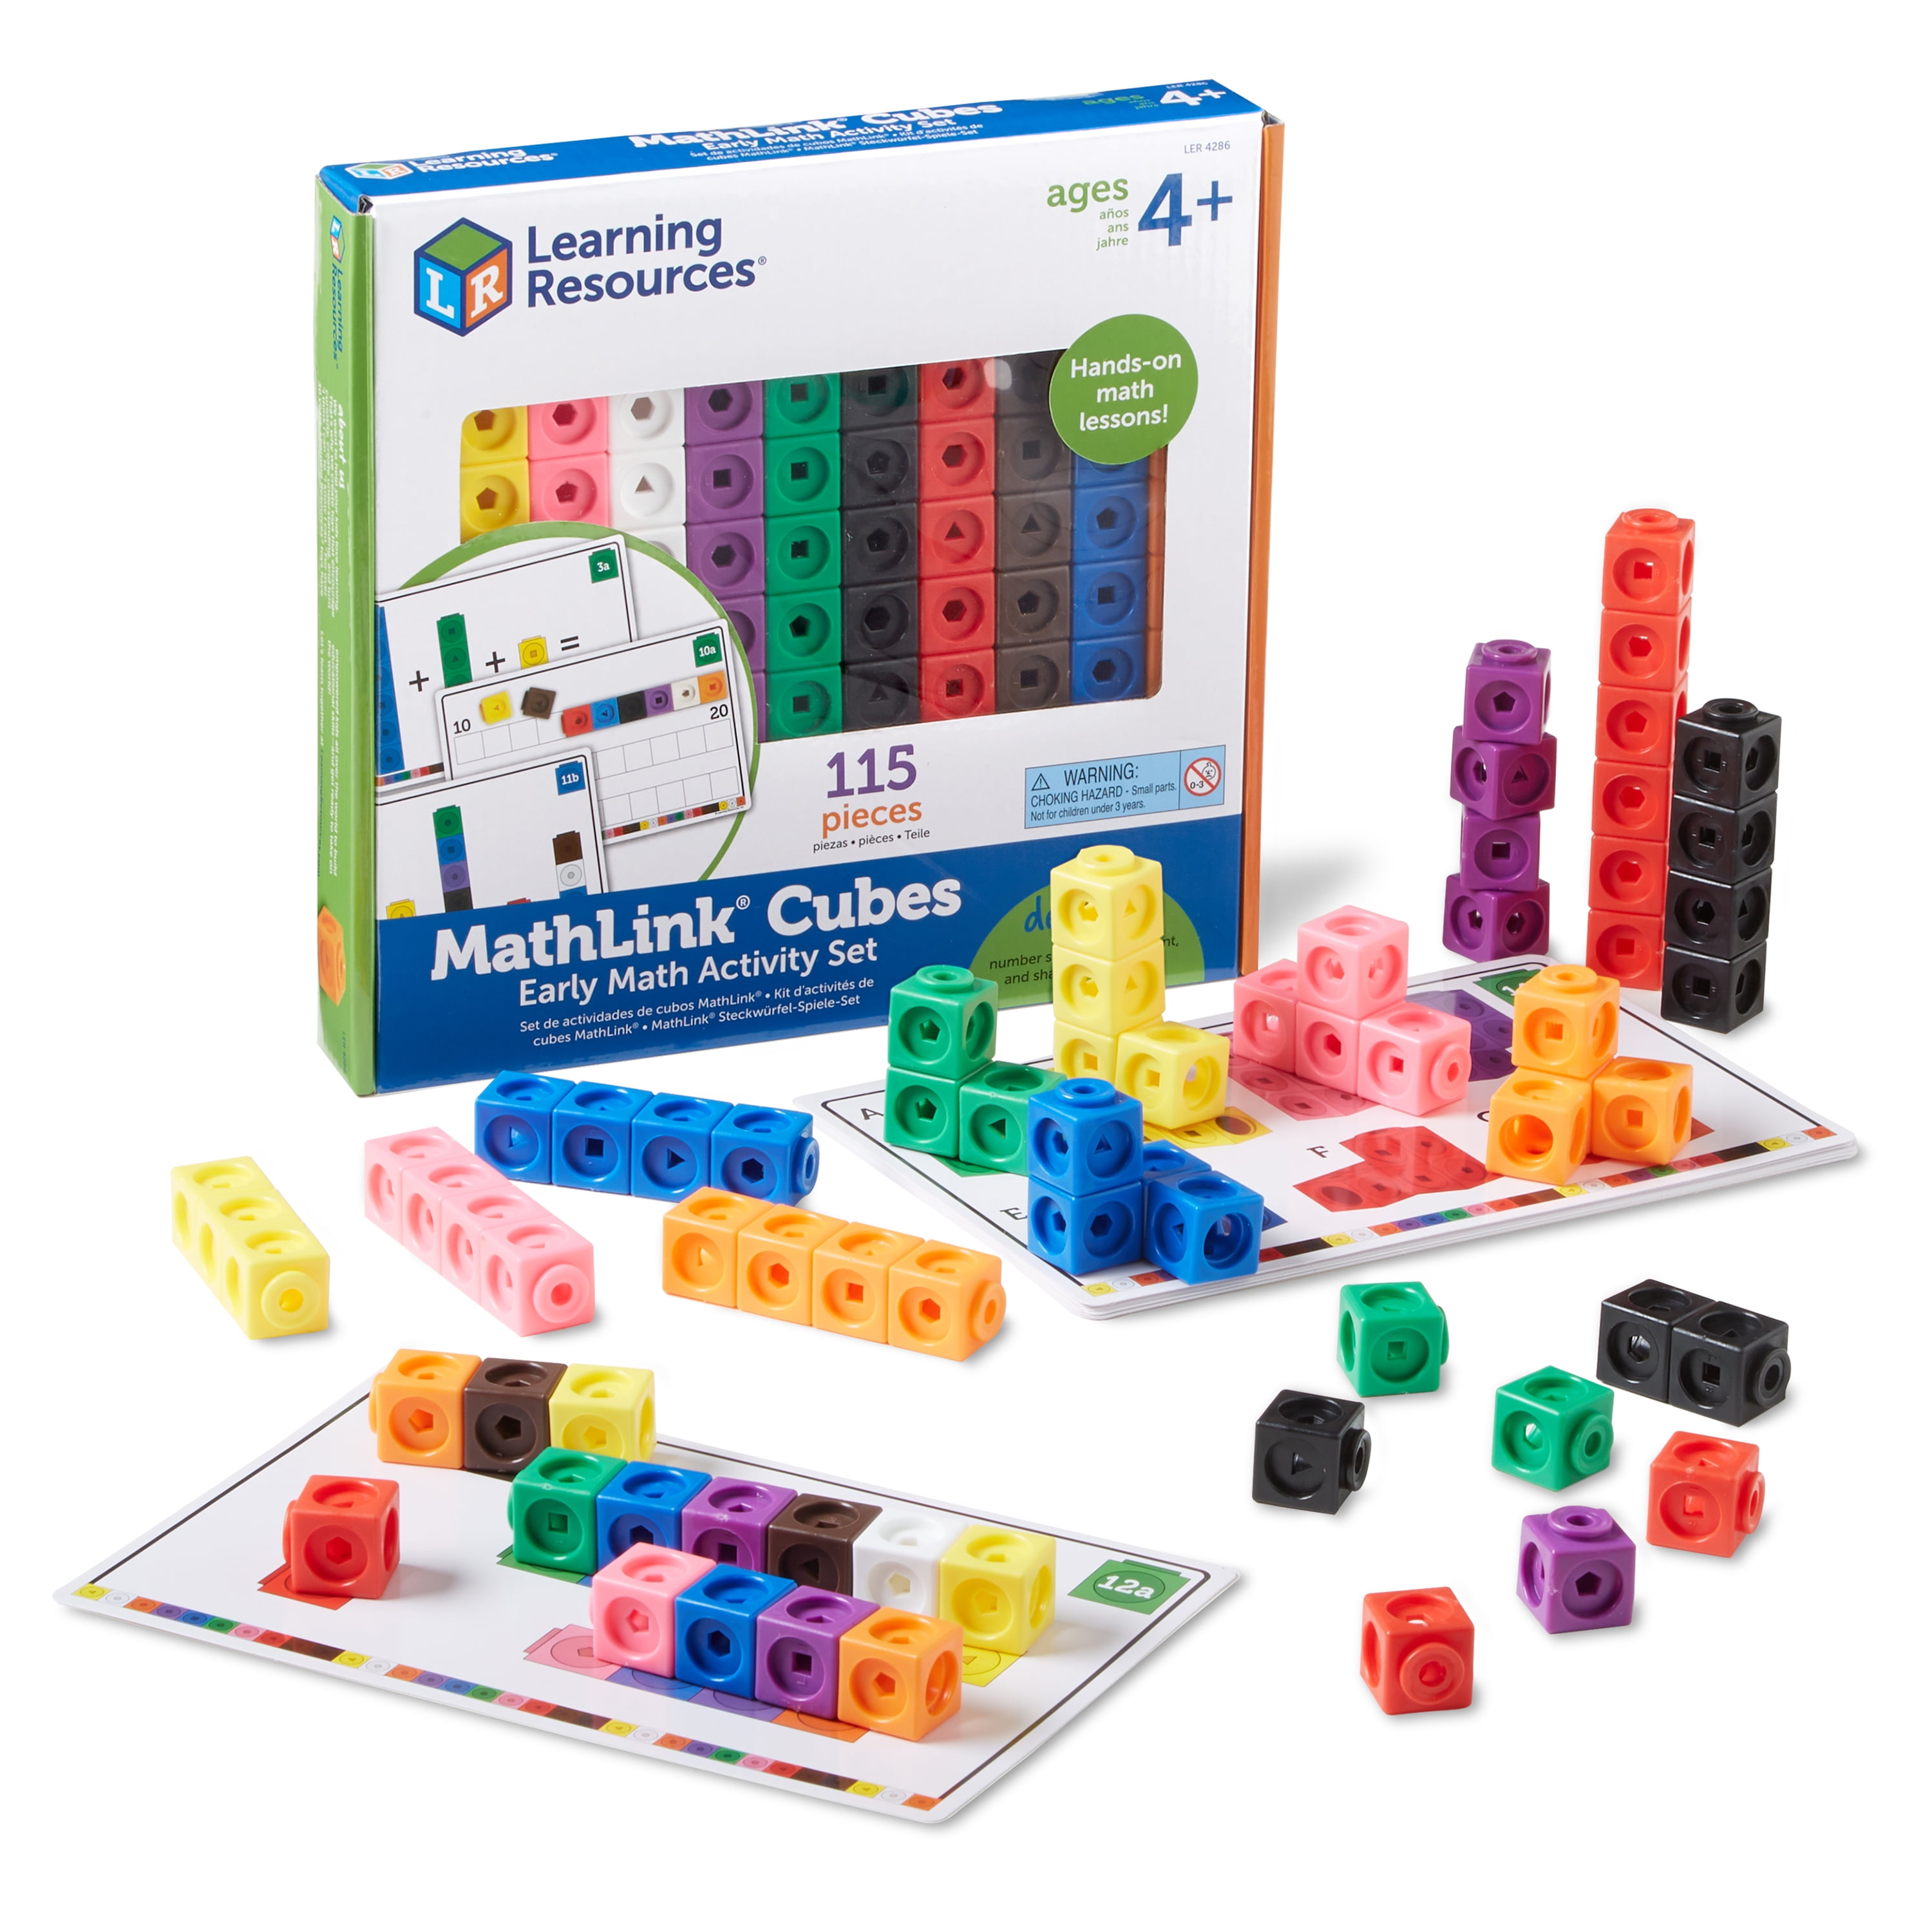 12 Hour Teaching & Demonstration Clock Multicoloured Set of 100 Learning Resources Mathlink Cubes Ages 5 12Hr & LER2095 Big Time Student